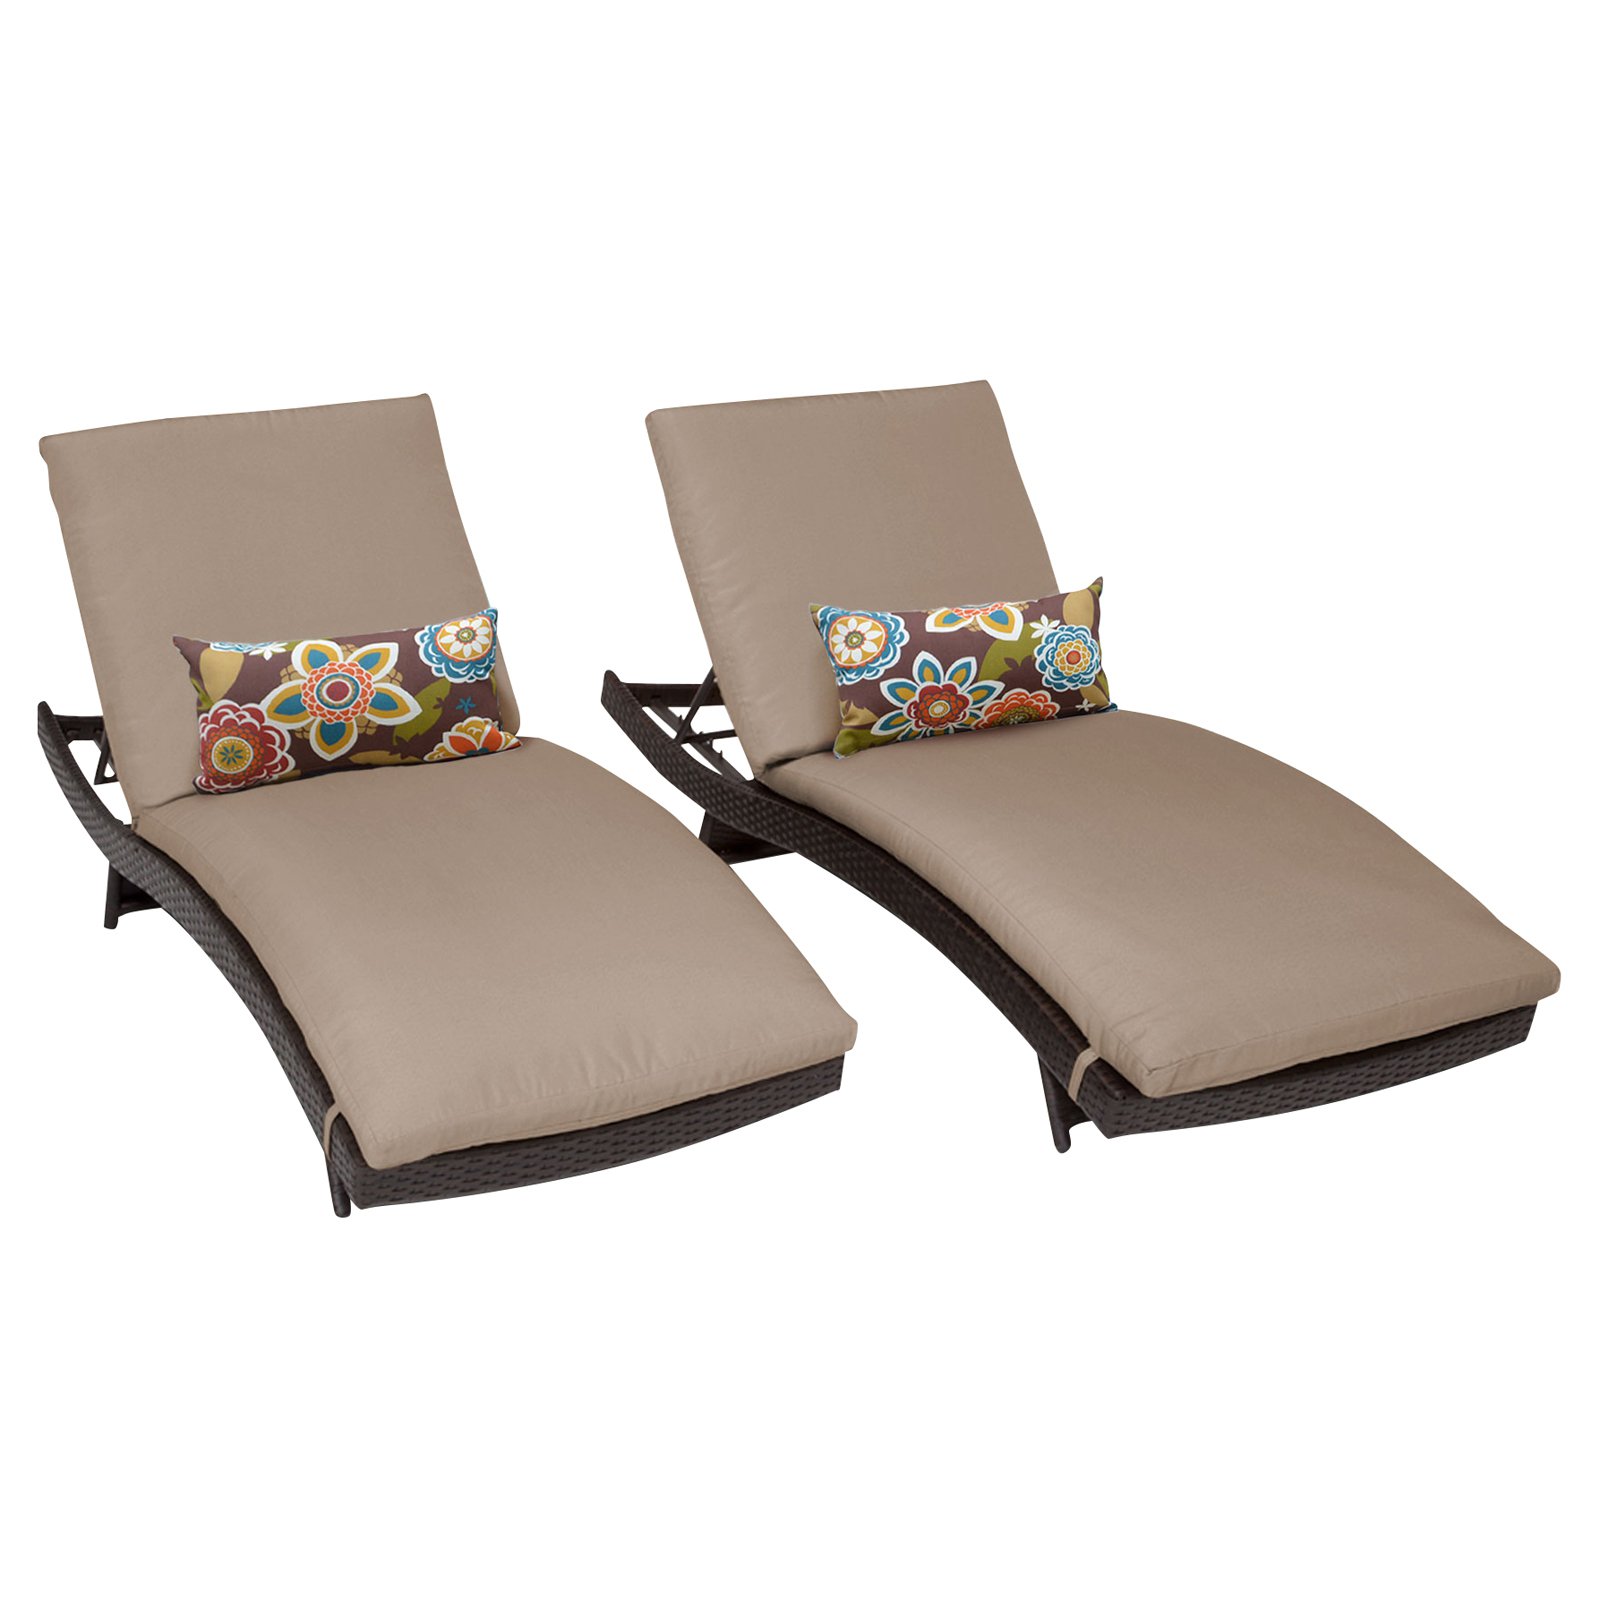 Barbados Curved Chaise Outdoor Wicker Patio Furniture in Tangerine (Set of 2) - image 2 of 4